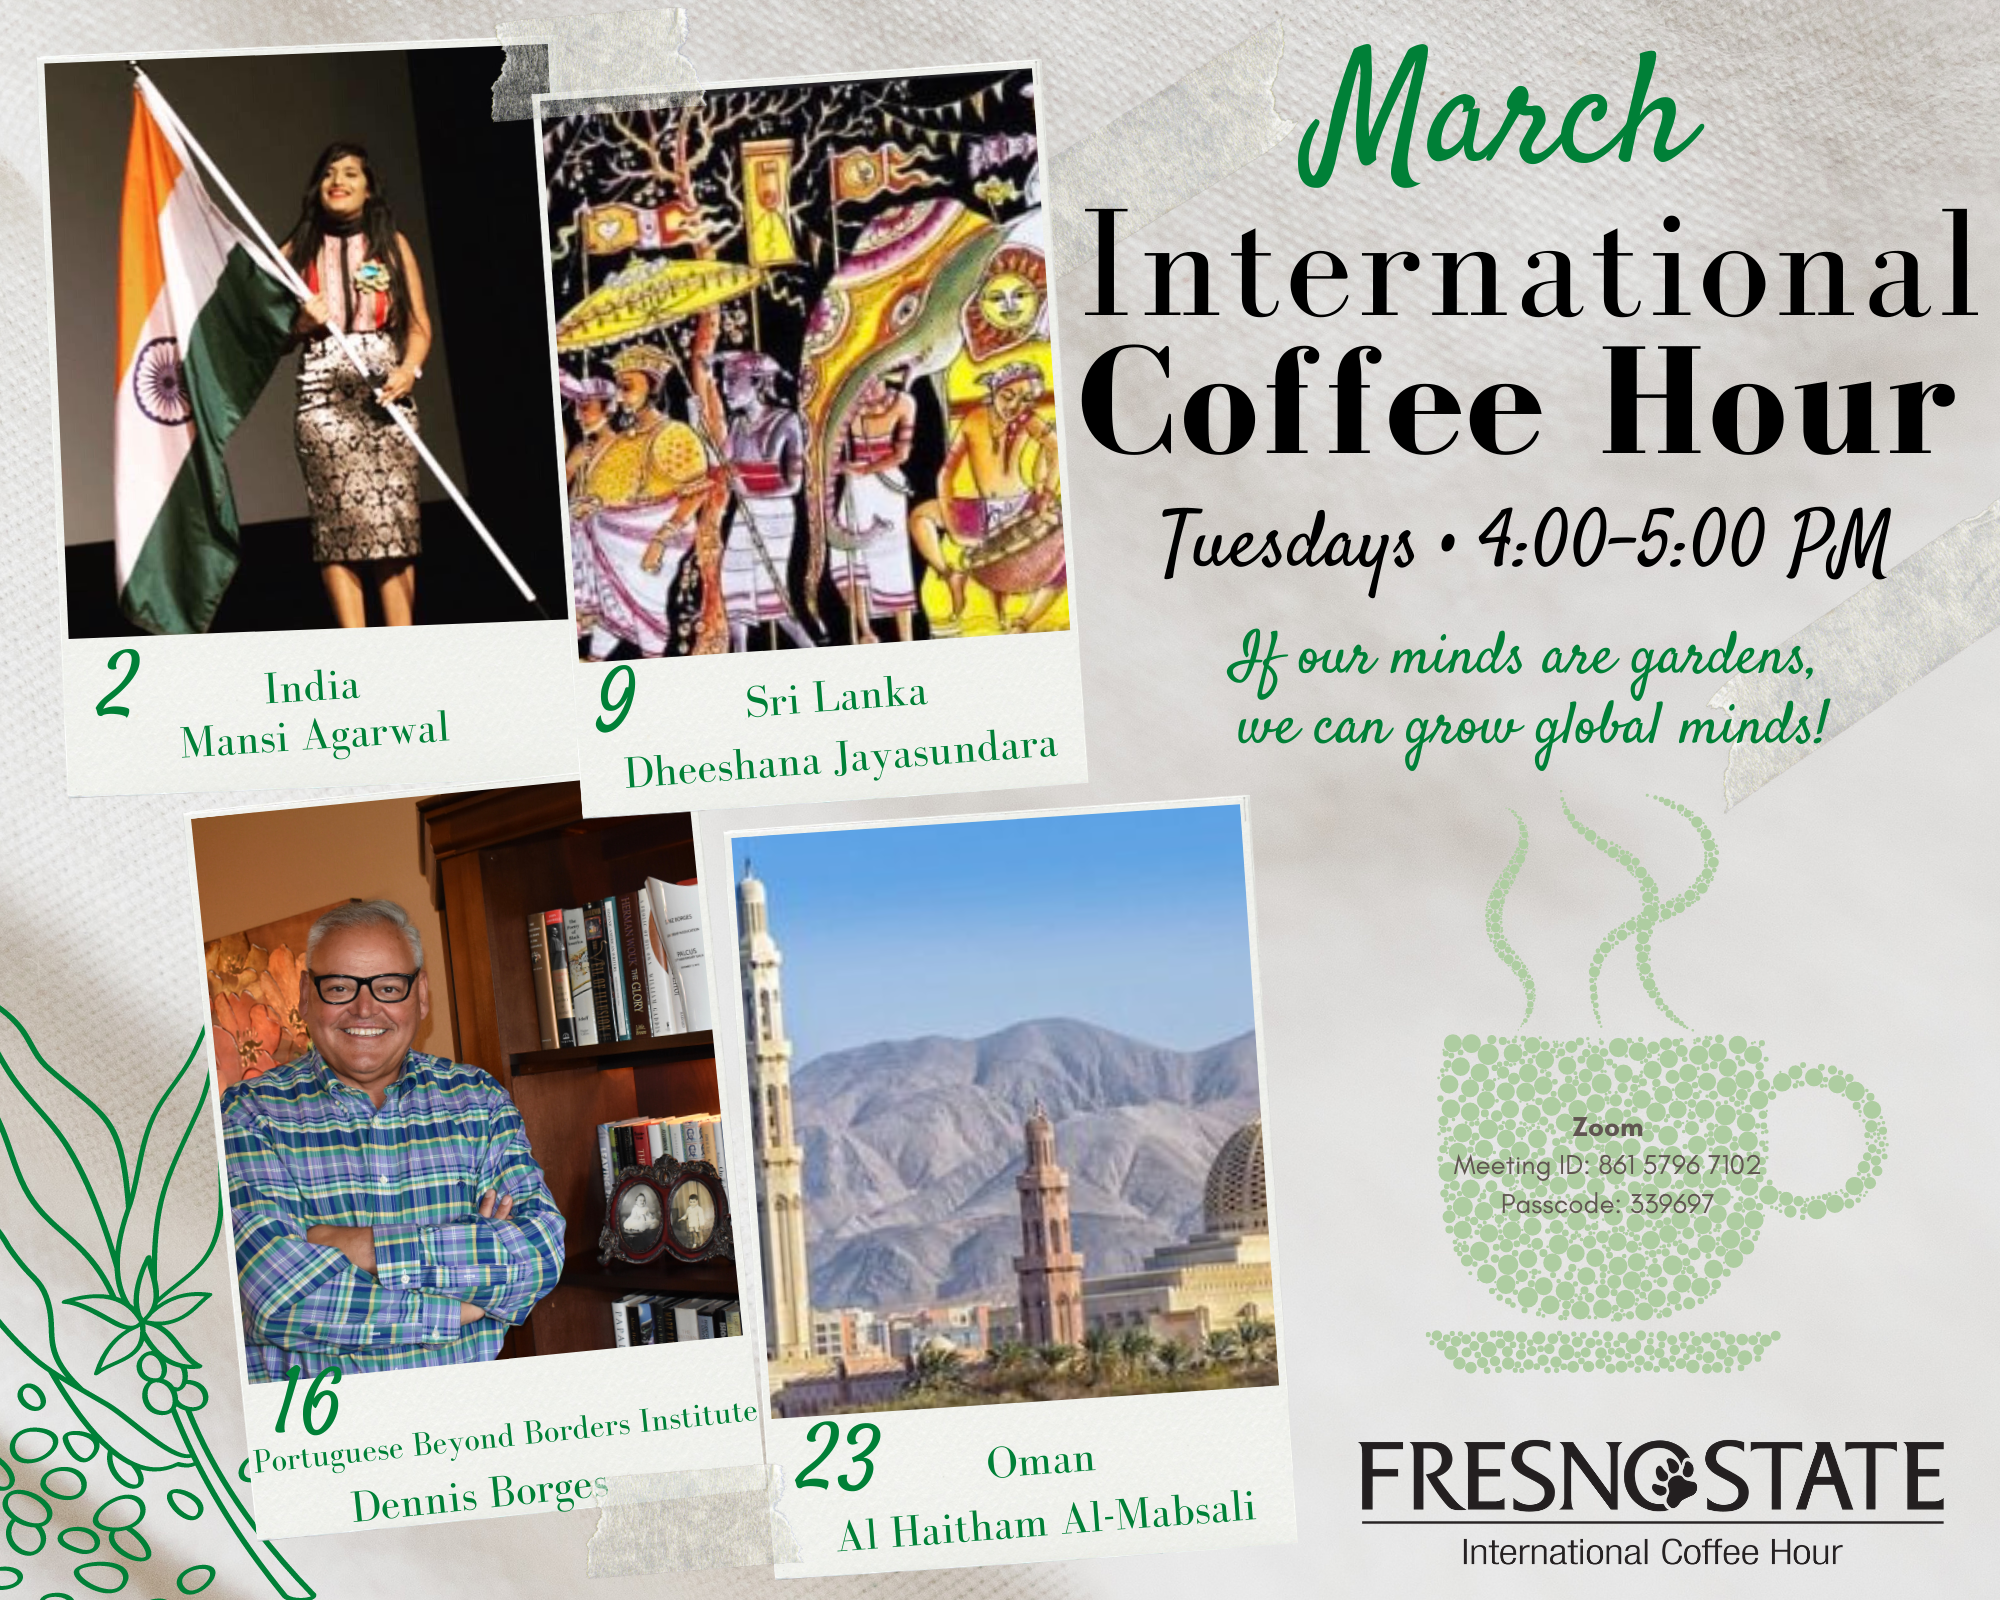 International Coffee Hour schedule for March. Event meets 4 to 5 p.m. Tuesdays.